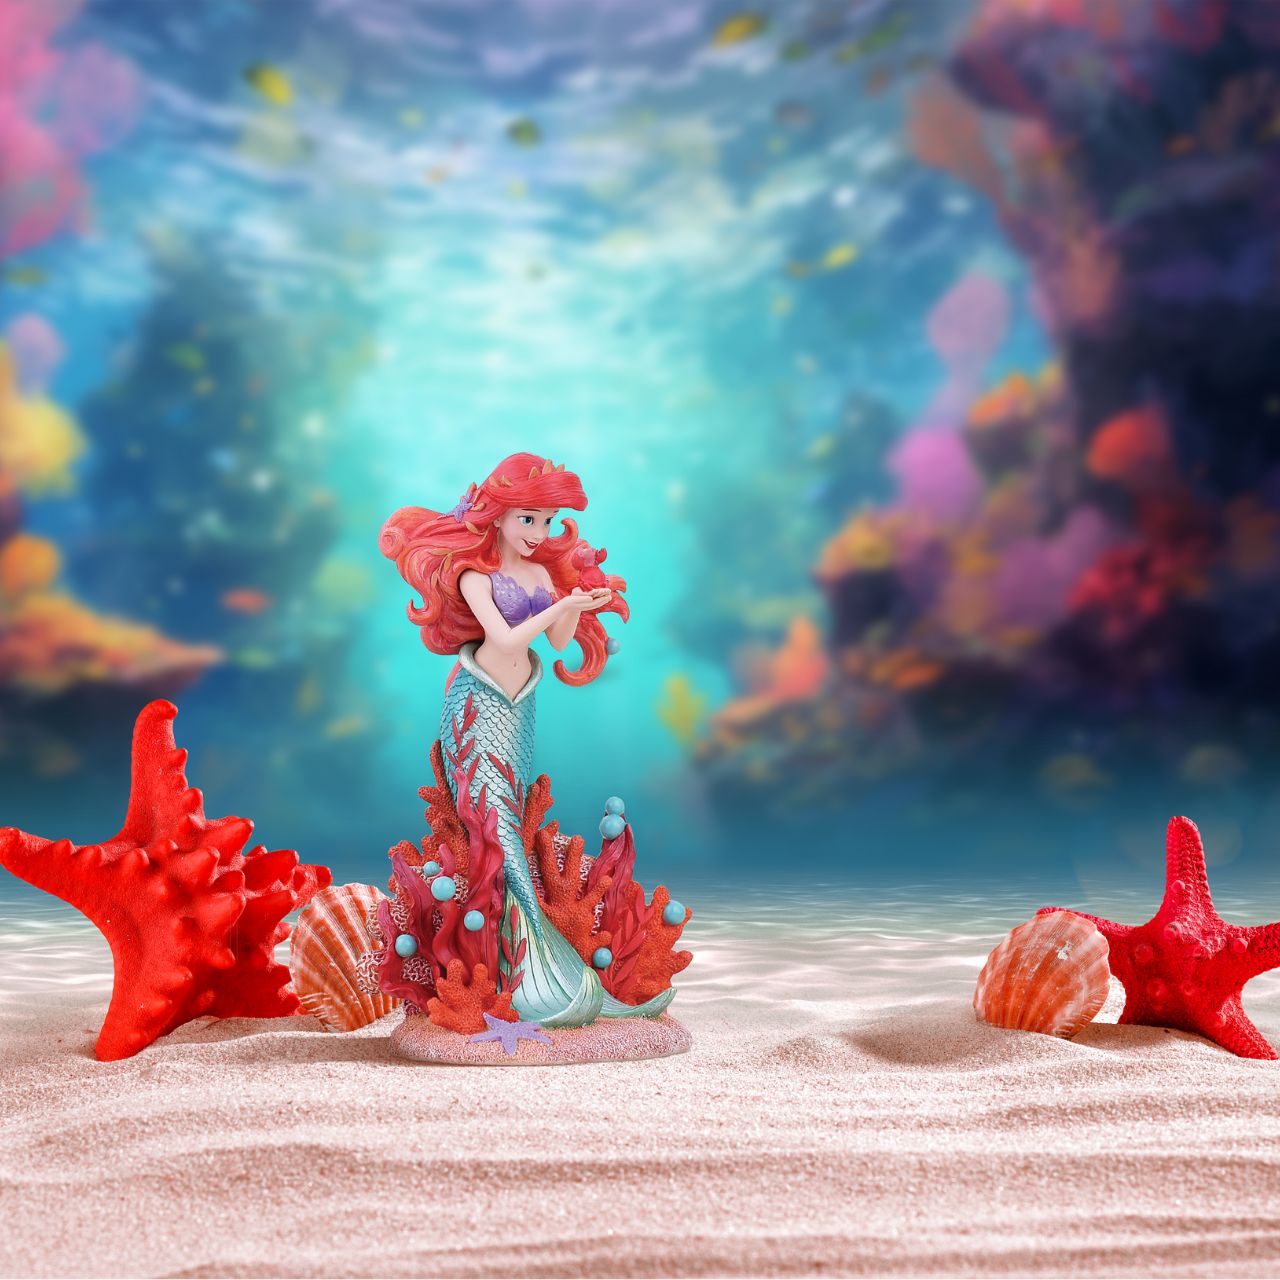 Ariel joins the Disney Showcase Botanical collection in honour of the film's 35th Anniversary featuring sea florals and coral (which is the 35th Anniversary gift). Ariel holds a small Sabastian in her delicate hands as she listens intently to his story. A vibrant base of coral, sand and rising bubbles encapsulates the underwater princess.